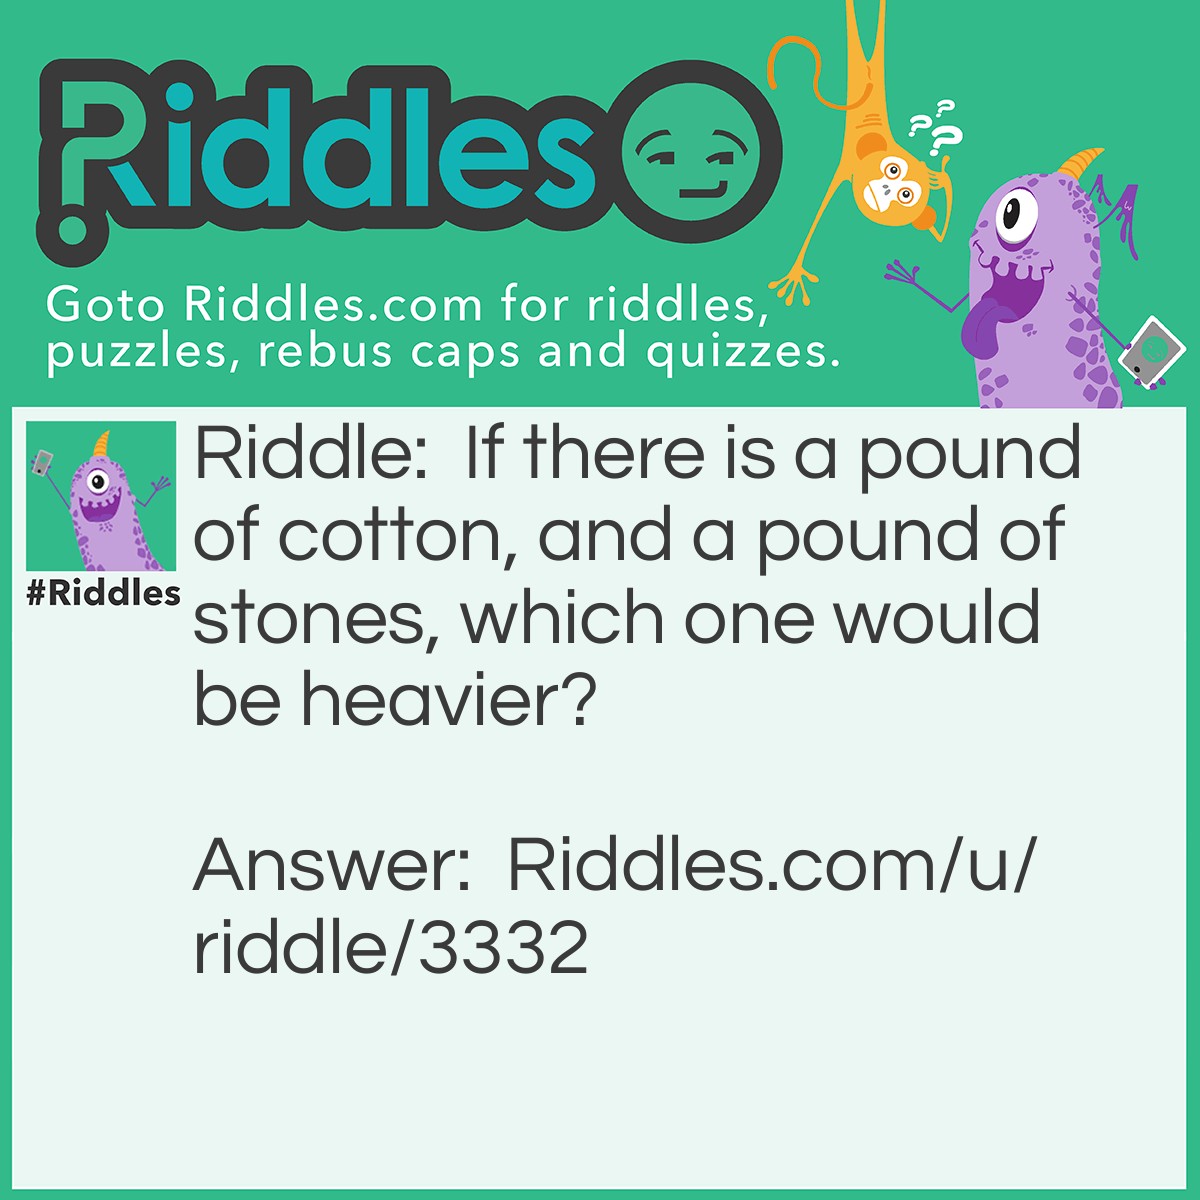 Riddle: If there is a pound of cotton, and a pound of stones, which one would be heavier? Answer: They are the same weight because there is ONE POUND of cotton and ONE POUND of stones.